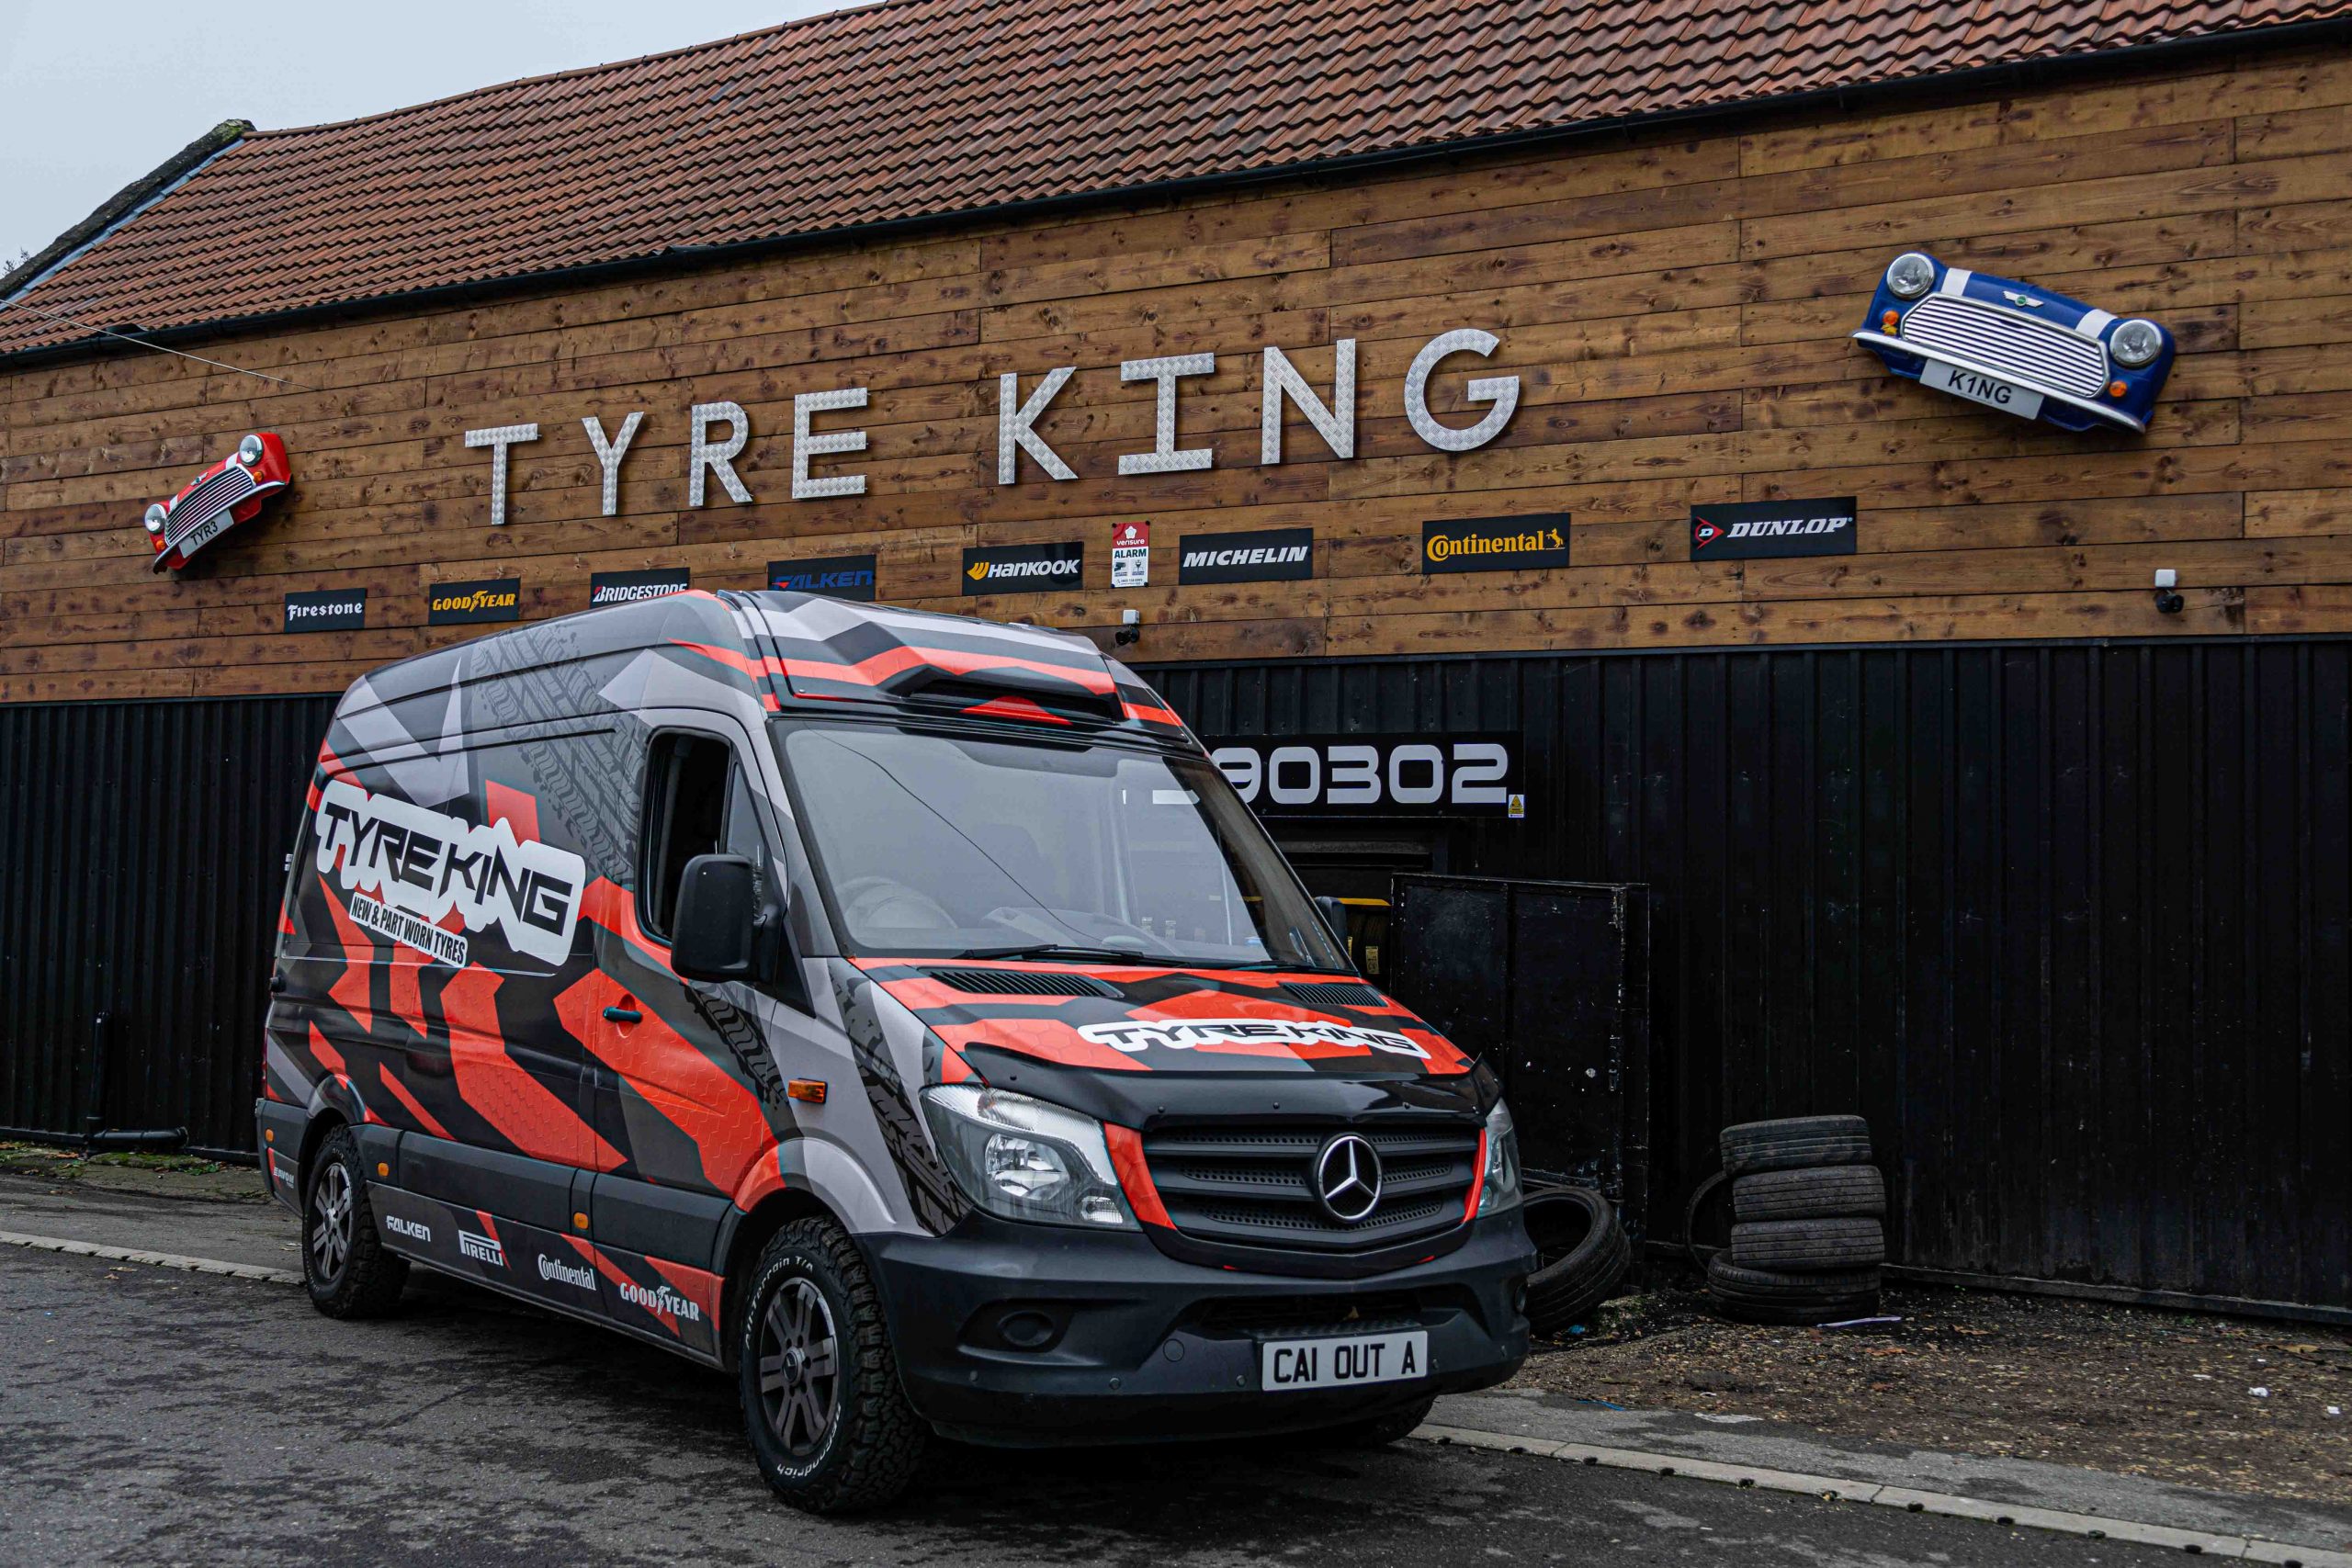 Tyre King Doncaster building outside with van in front